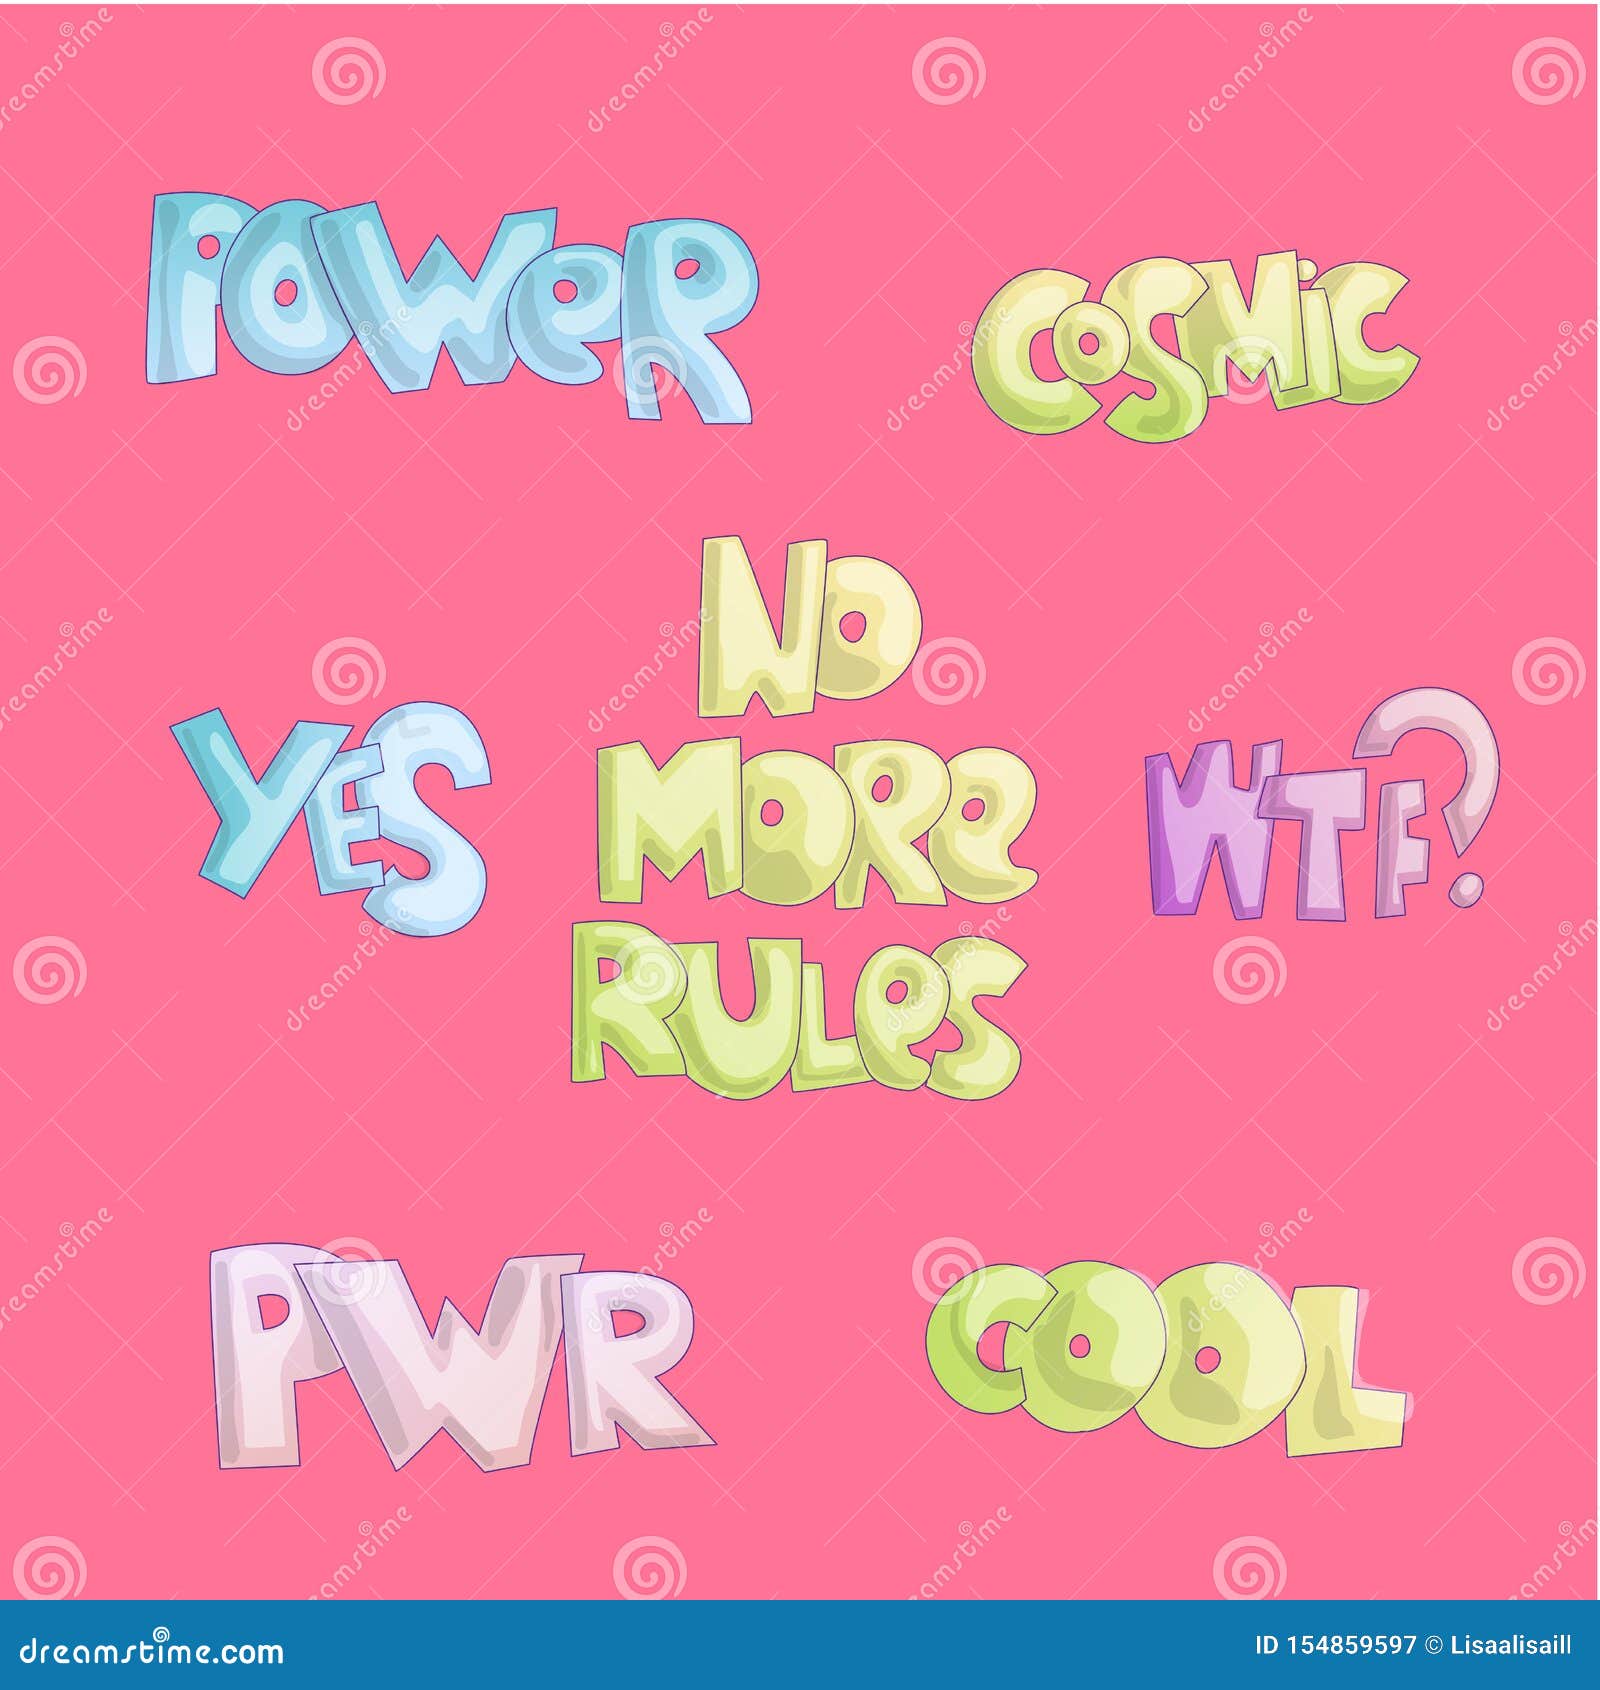 https://thumbs.dreamstime.com/z/cute-cartoon-funny-quotes-sticker-free-life-cool-lettering-girls-feminist-princess-font-no-more-rules-power-cosmic-154859597.jpg